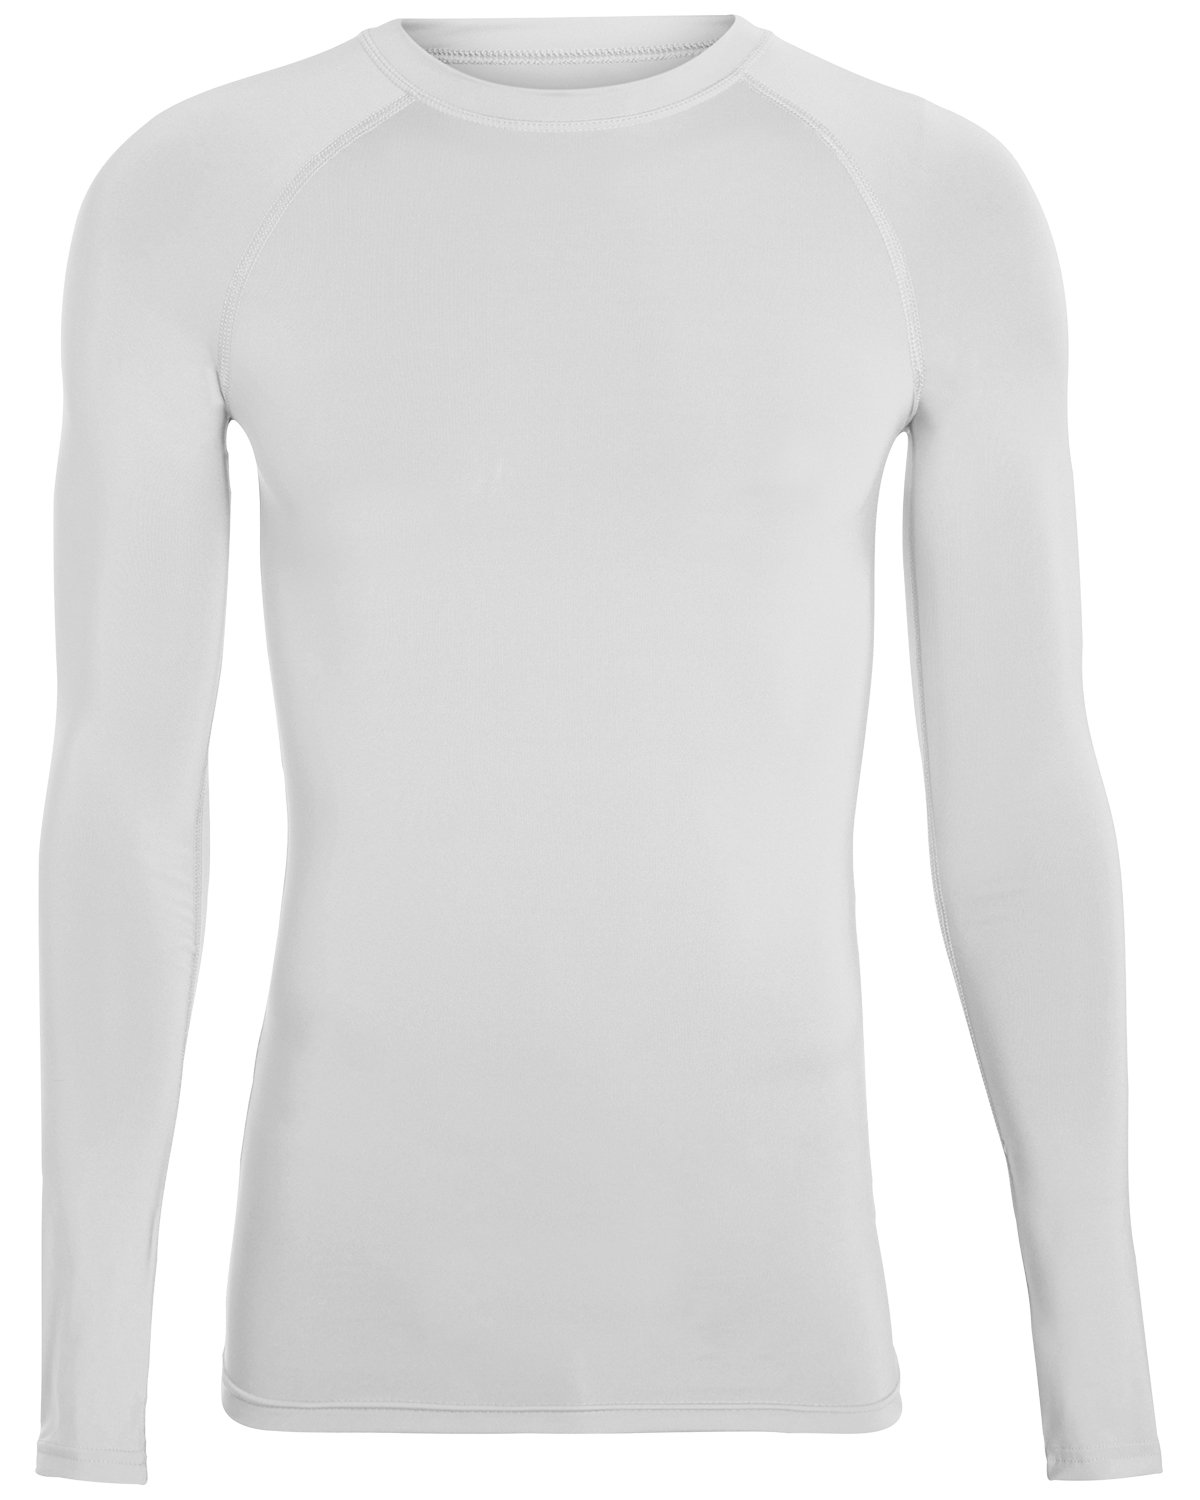 Youth Hyperform Long-Sleeve Compression Shirt-